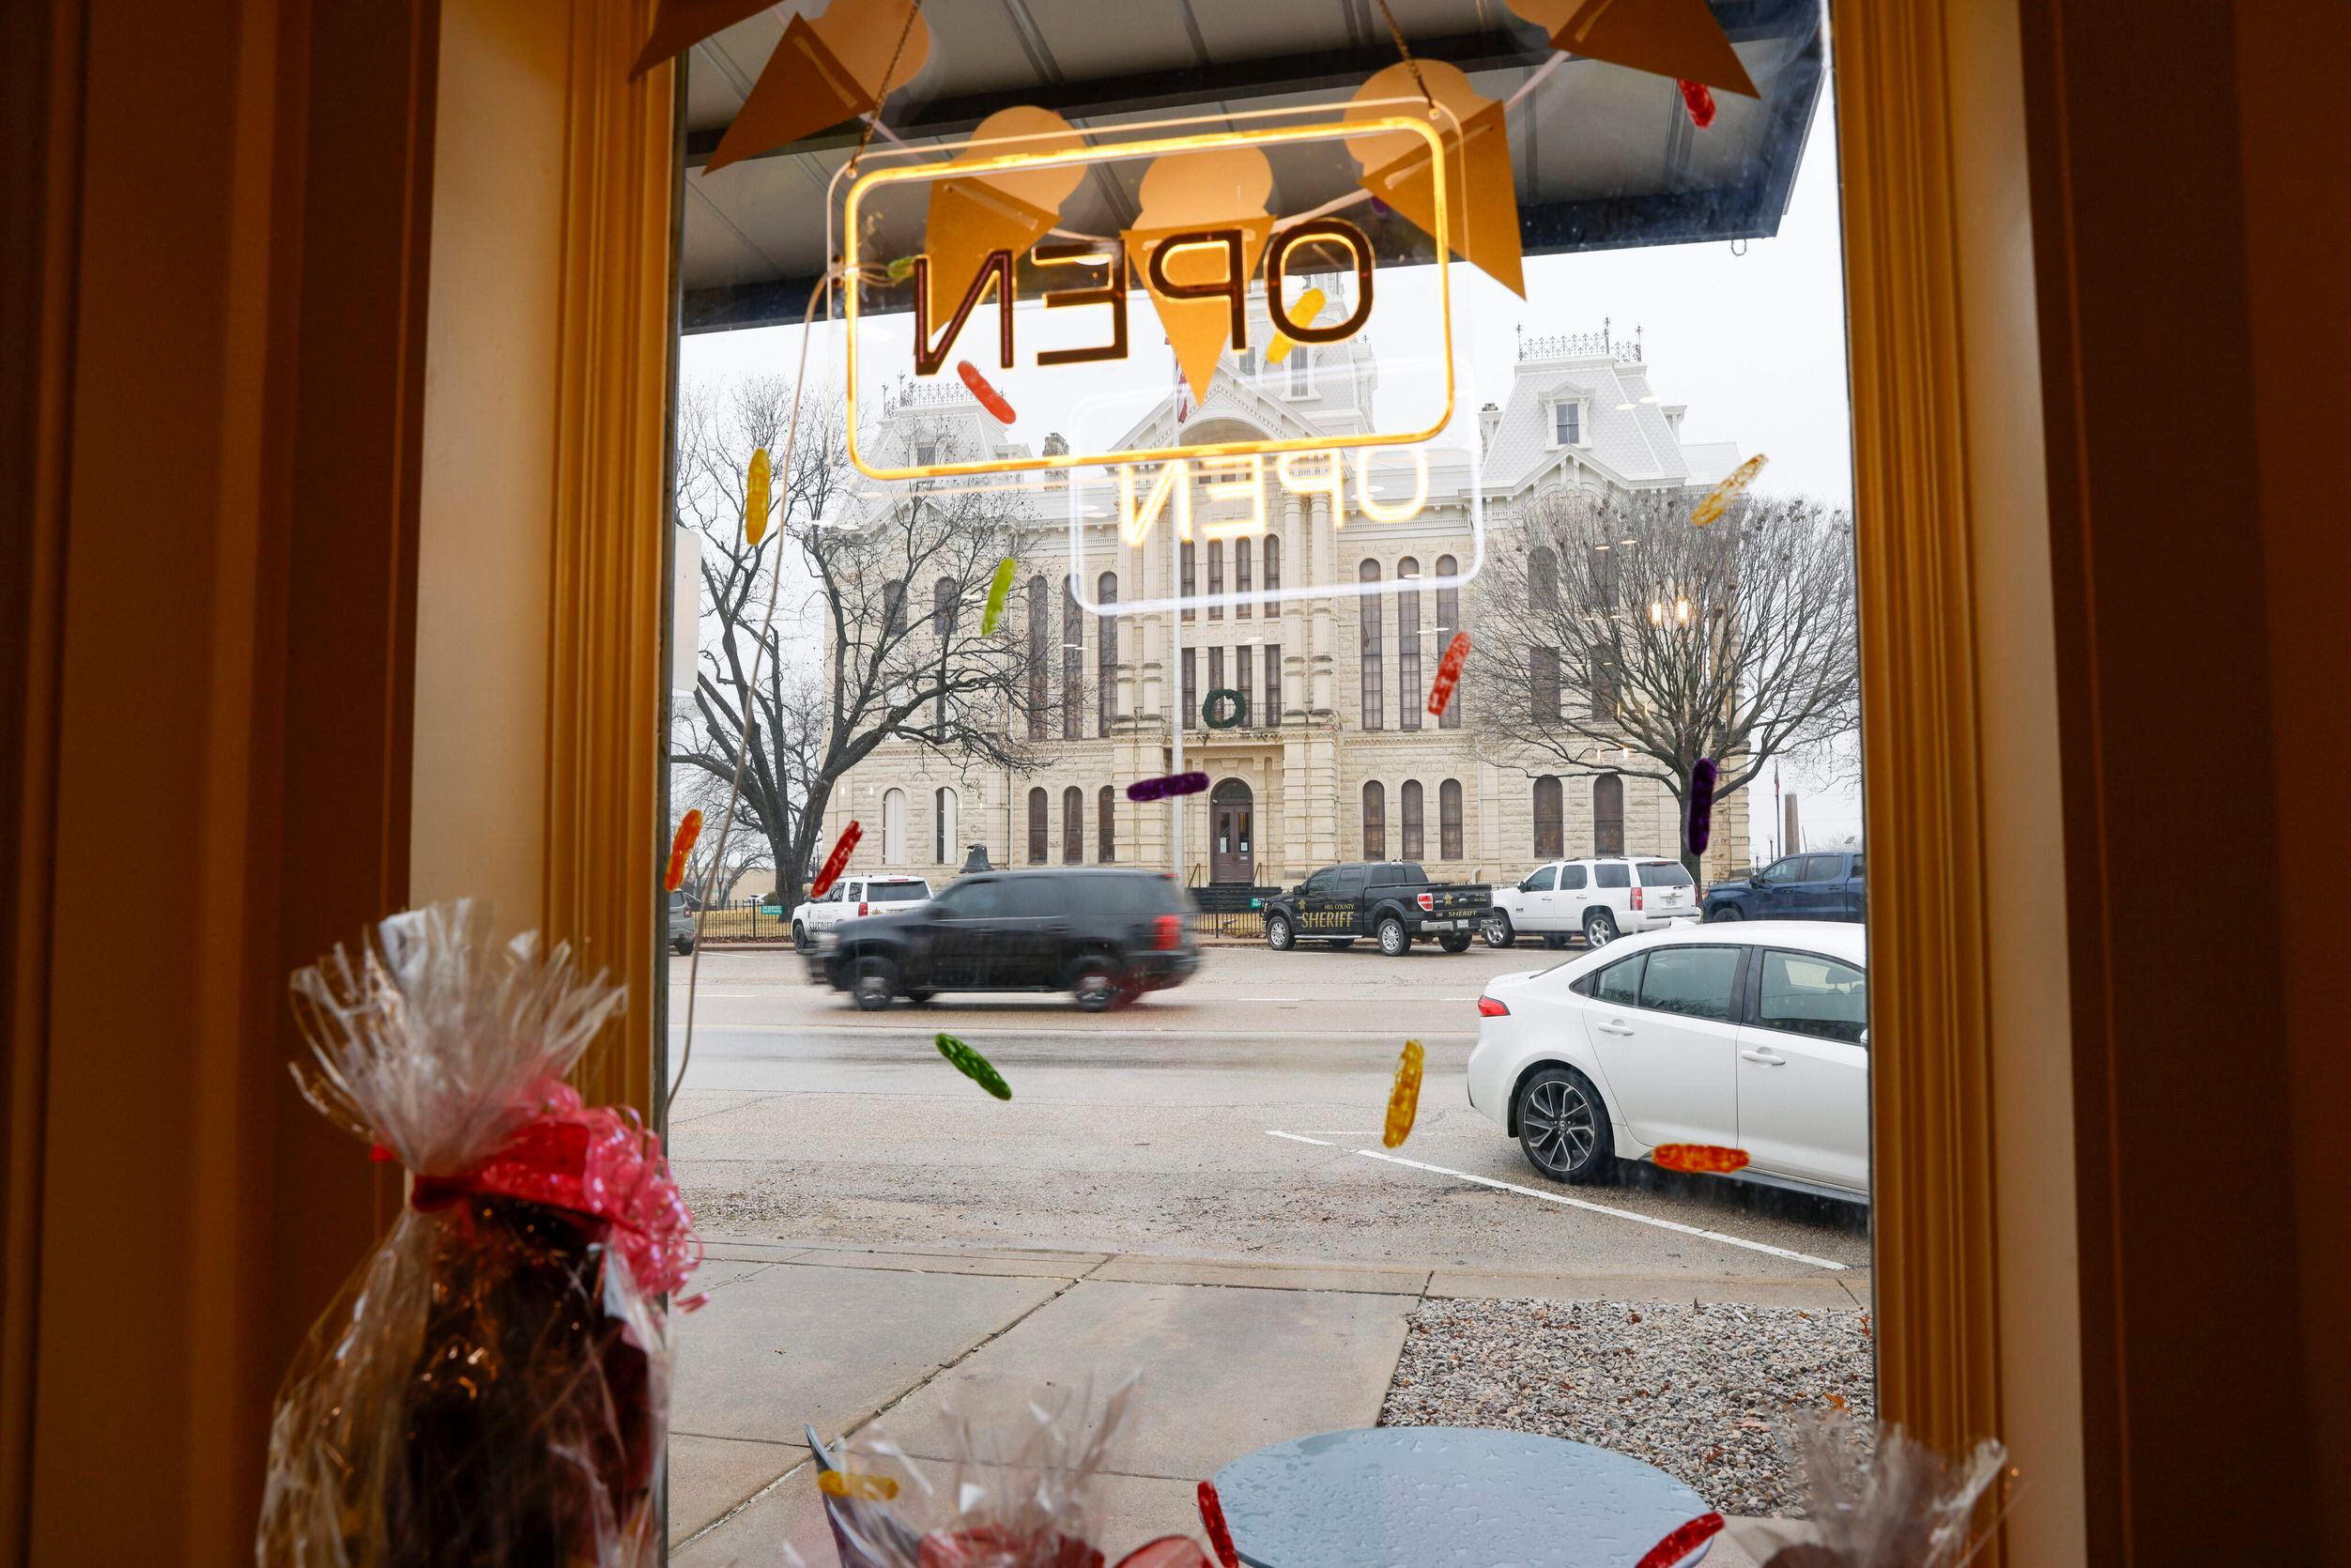 The Hillsboro County Courthouse is seen through the window of Sweet Joy Ice Cream and Candy...